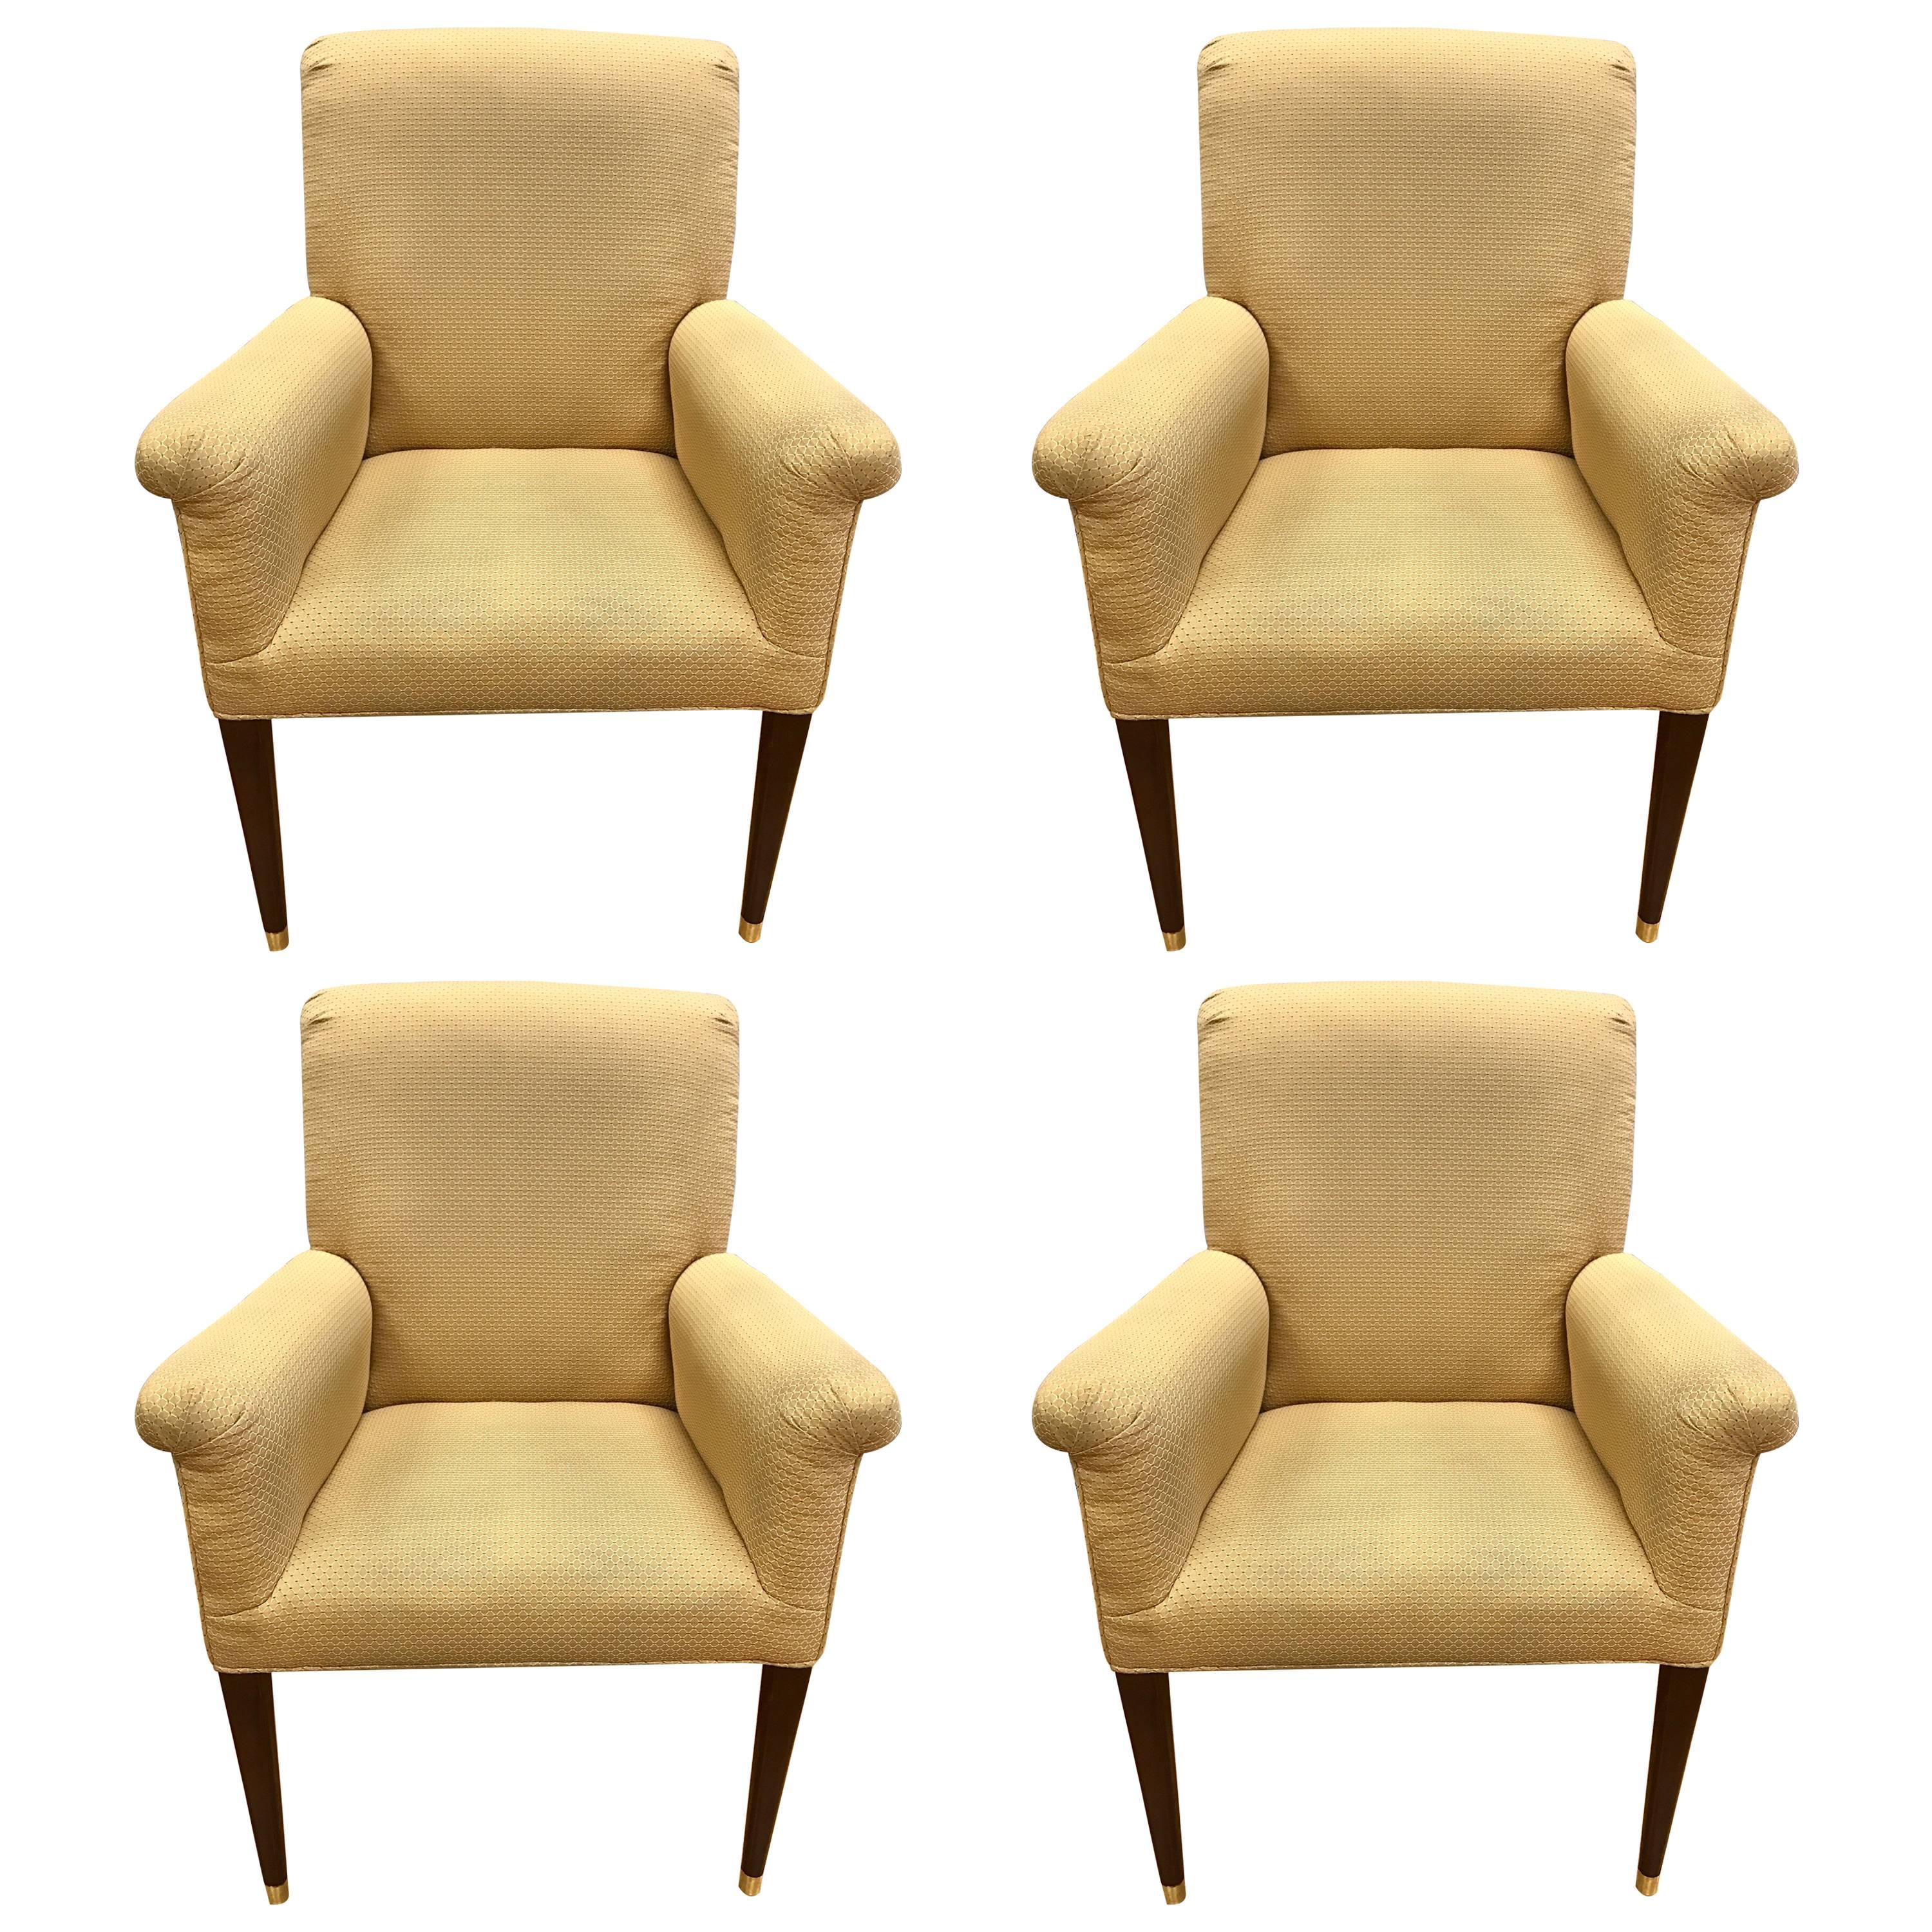 Four Baker Furniture Gold Upholstered Armchairs